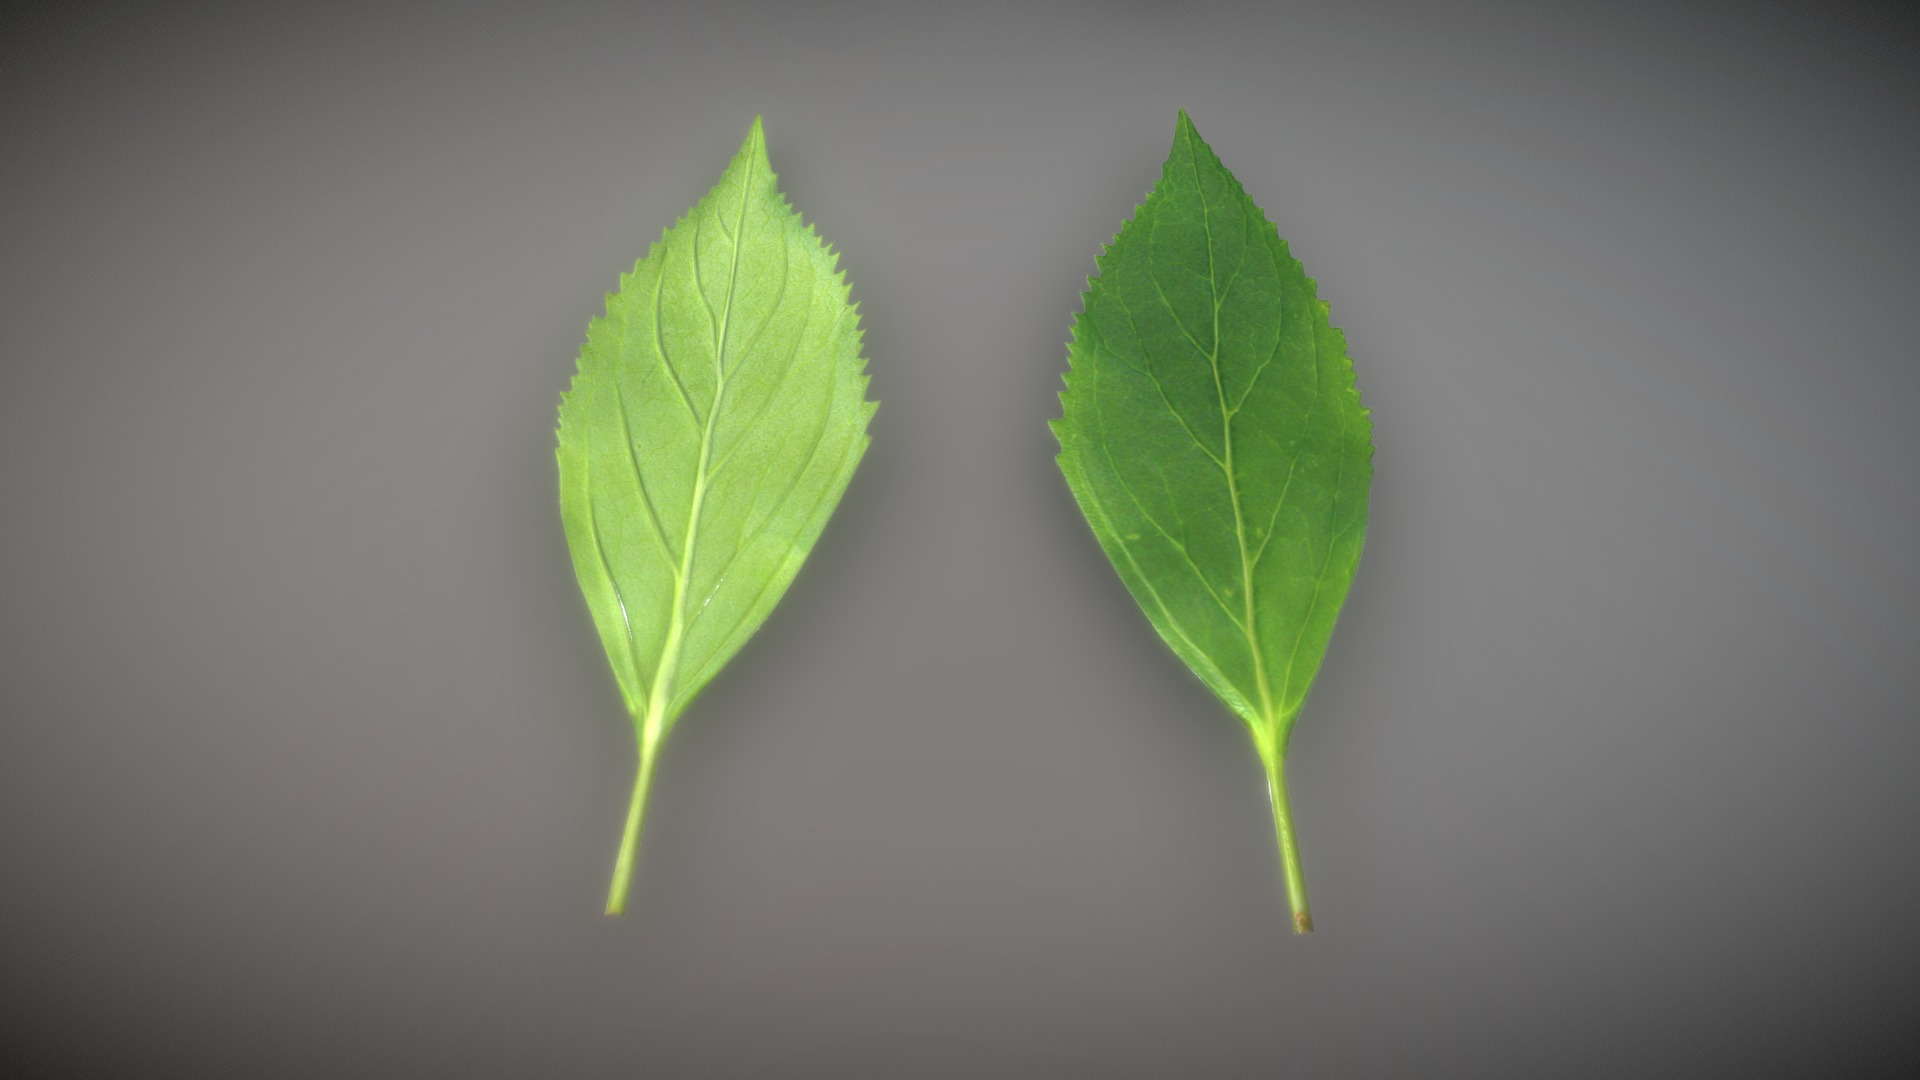 3D model Forsythia Leaves – Forsythia x interm Low-Poly - This is a 3D model of the Forsythia Leaves - Forsythia x interm Low-Poly. The 3D model is about a leaf on a white background.